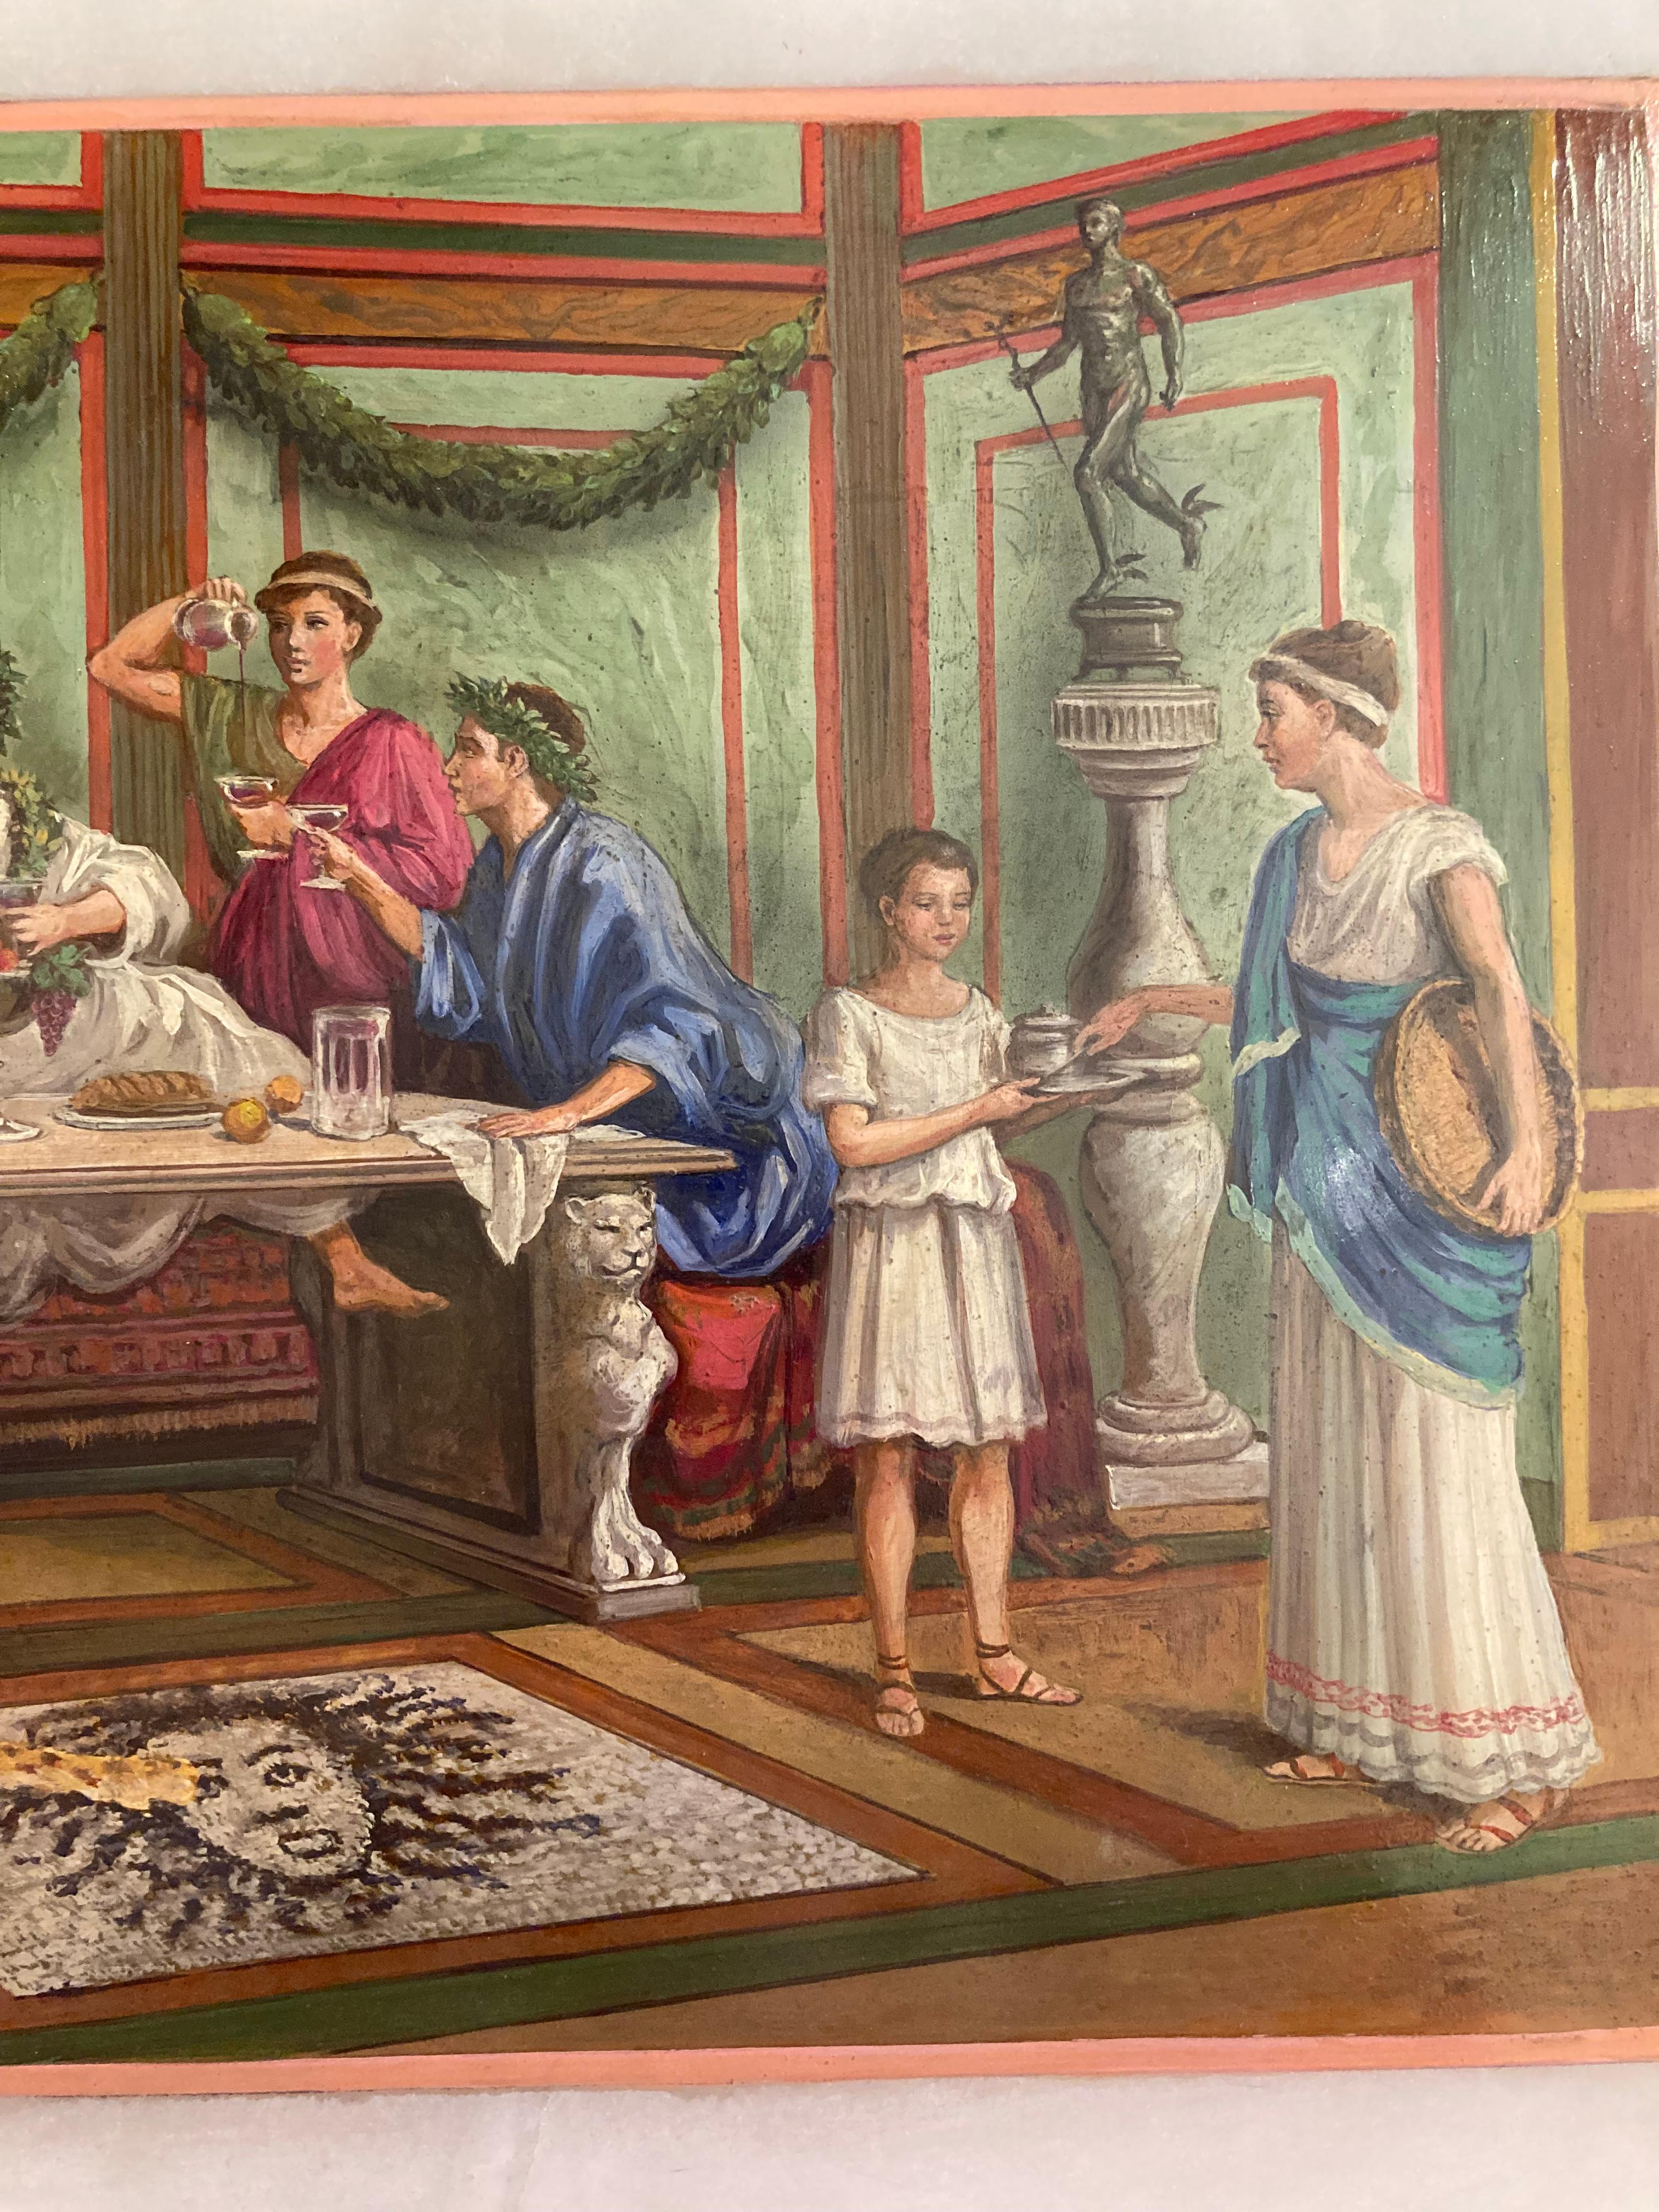 This Italian 19th century oil on alabastrer painting depicts an opulent interior in full ancient neoclassical Pompeian style with people festing.
The figurative inner scene is painted on a rectangular alabaster slab and housed in a wonderful